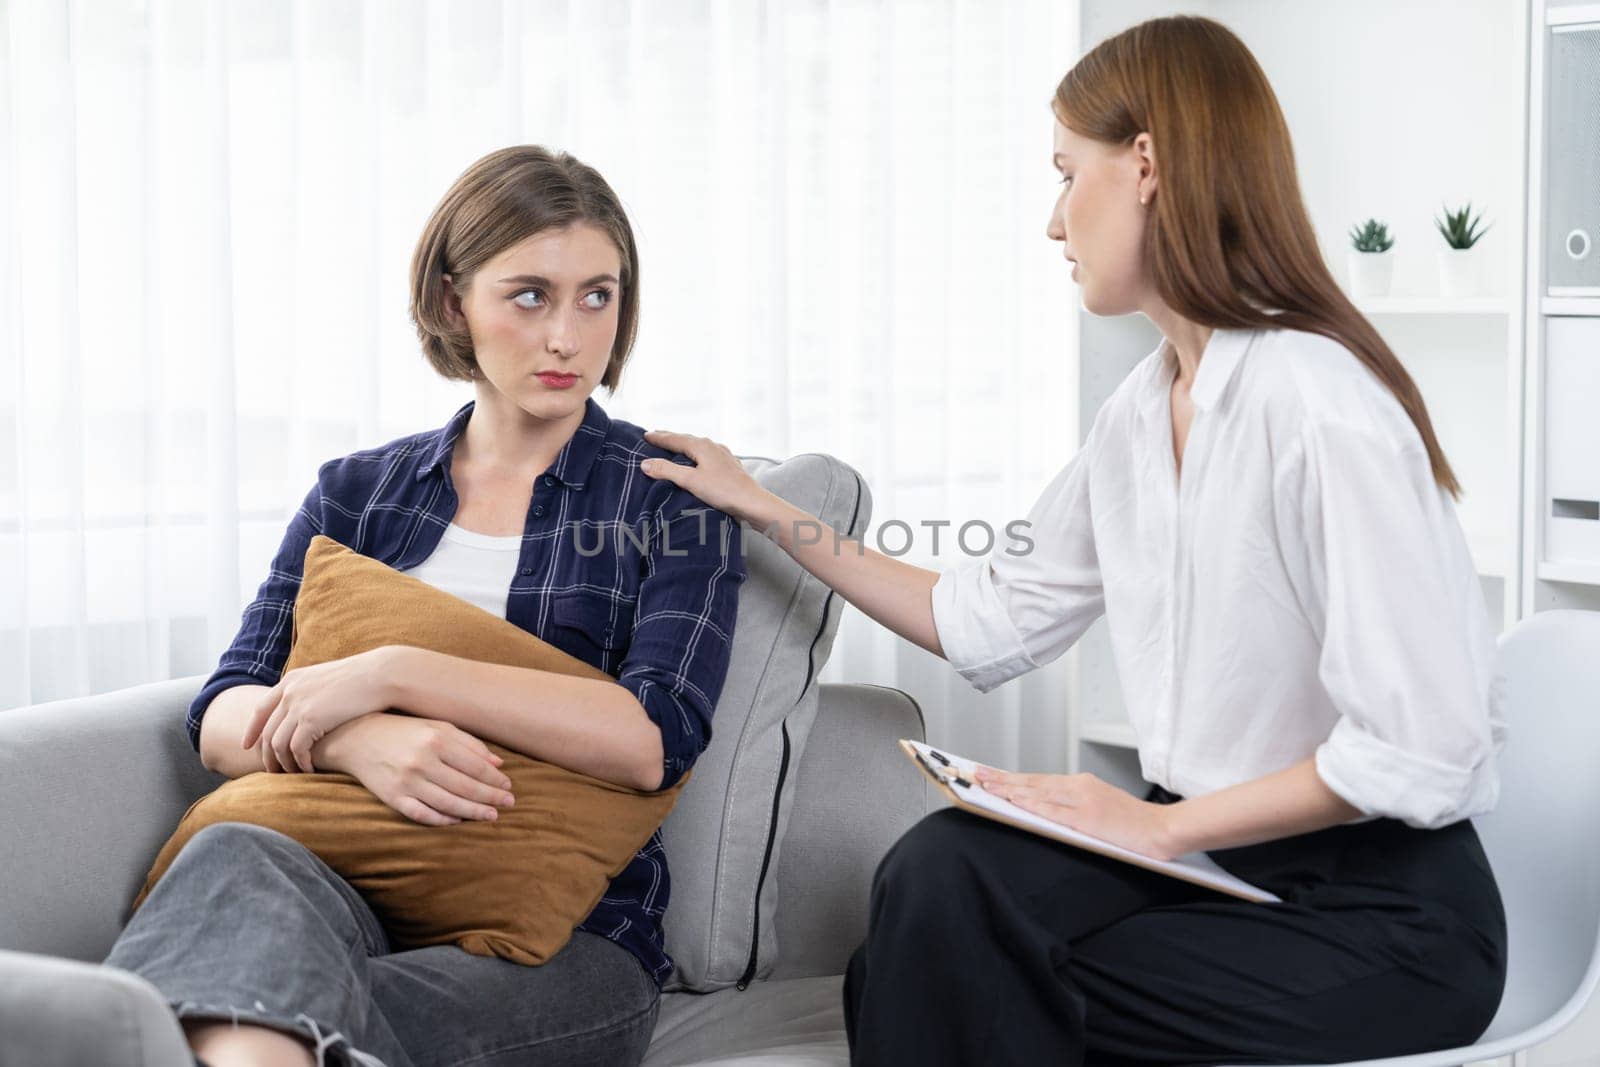 Sad PTSD woman patient in utmost therapy for mental health with psychologist by biancoblue